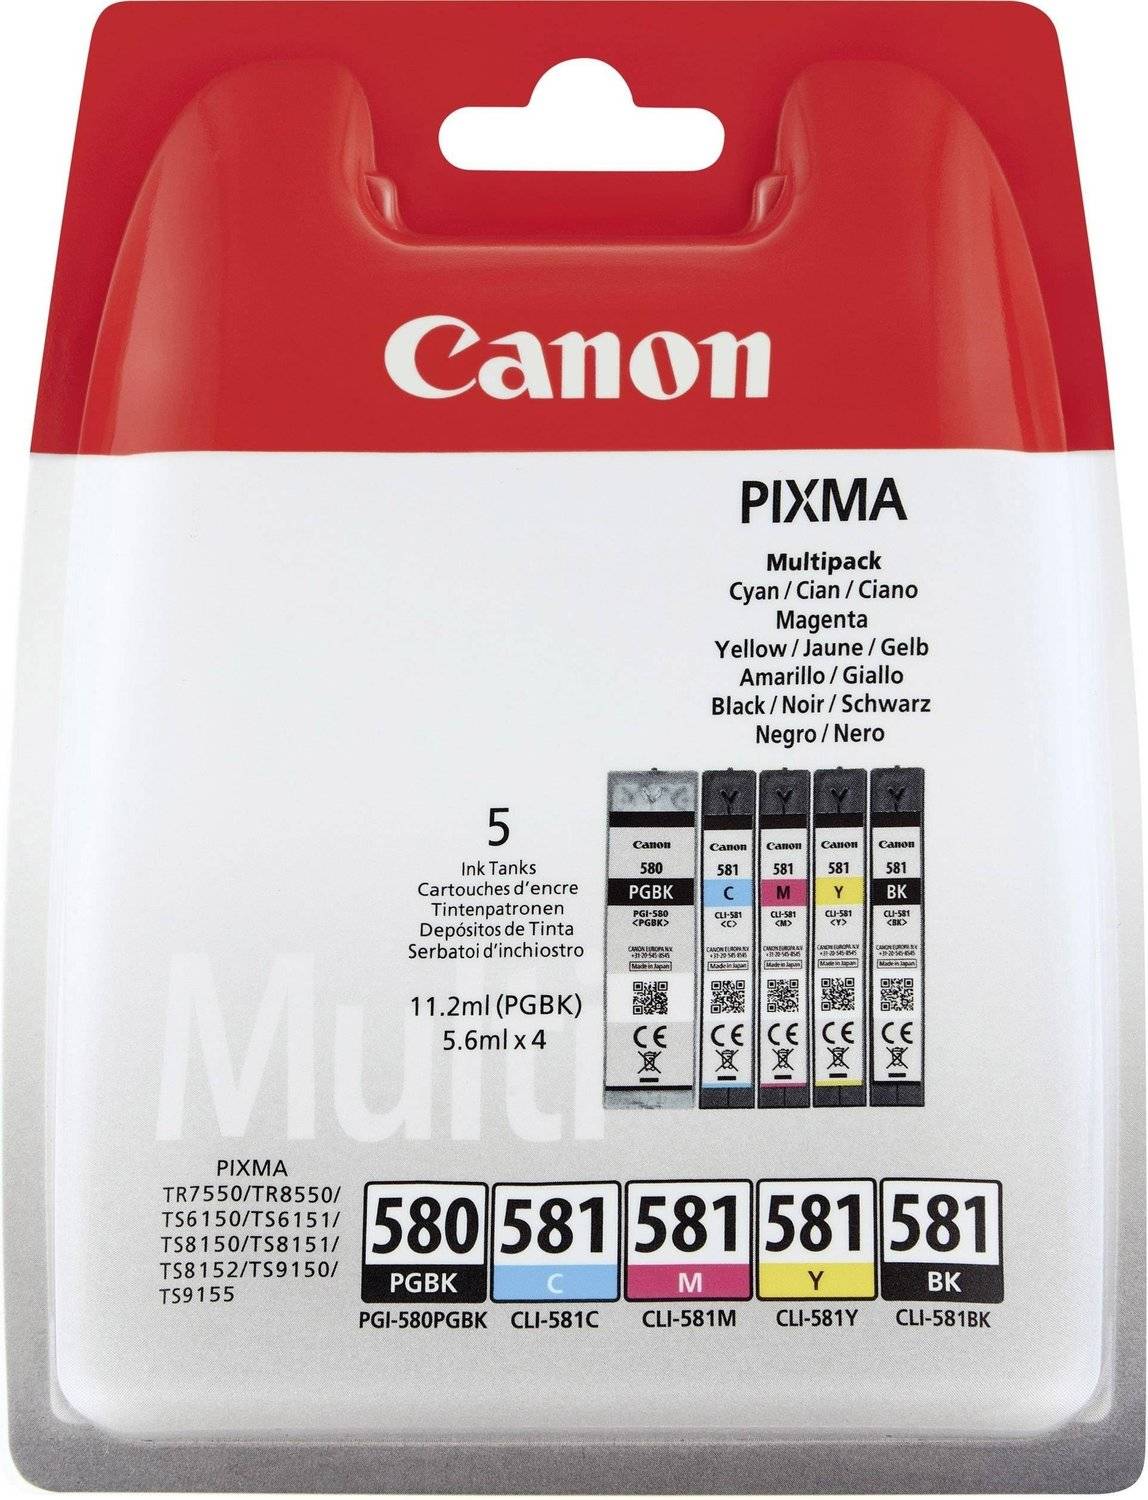 Specifications & Features - Canon PIXMA TS6150 Series - Canon Cyprus